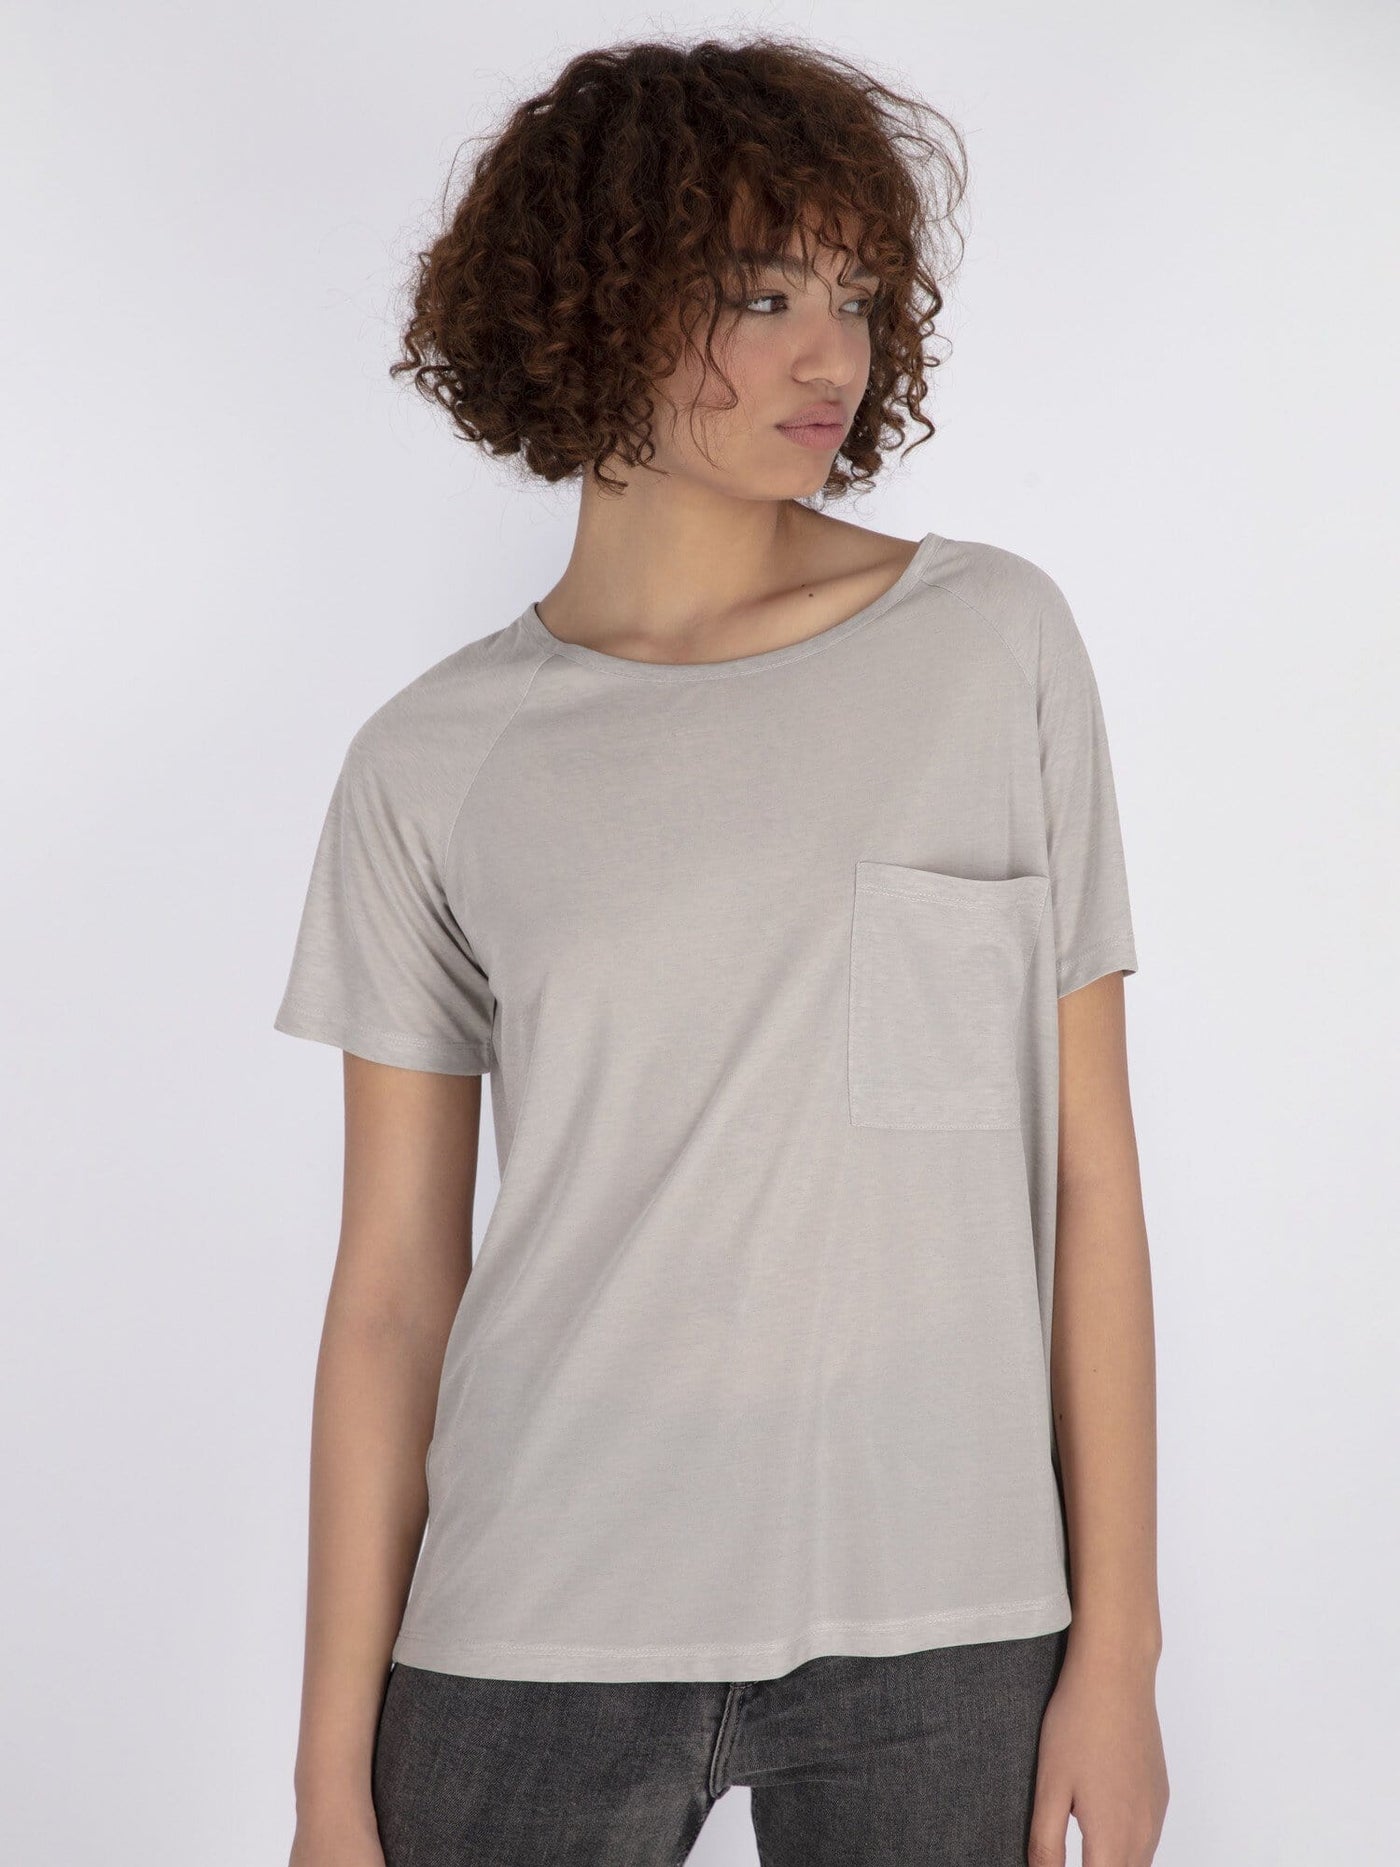 OR Tops & Blouses Short Sleeve Top with Round Neck